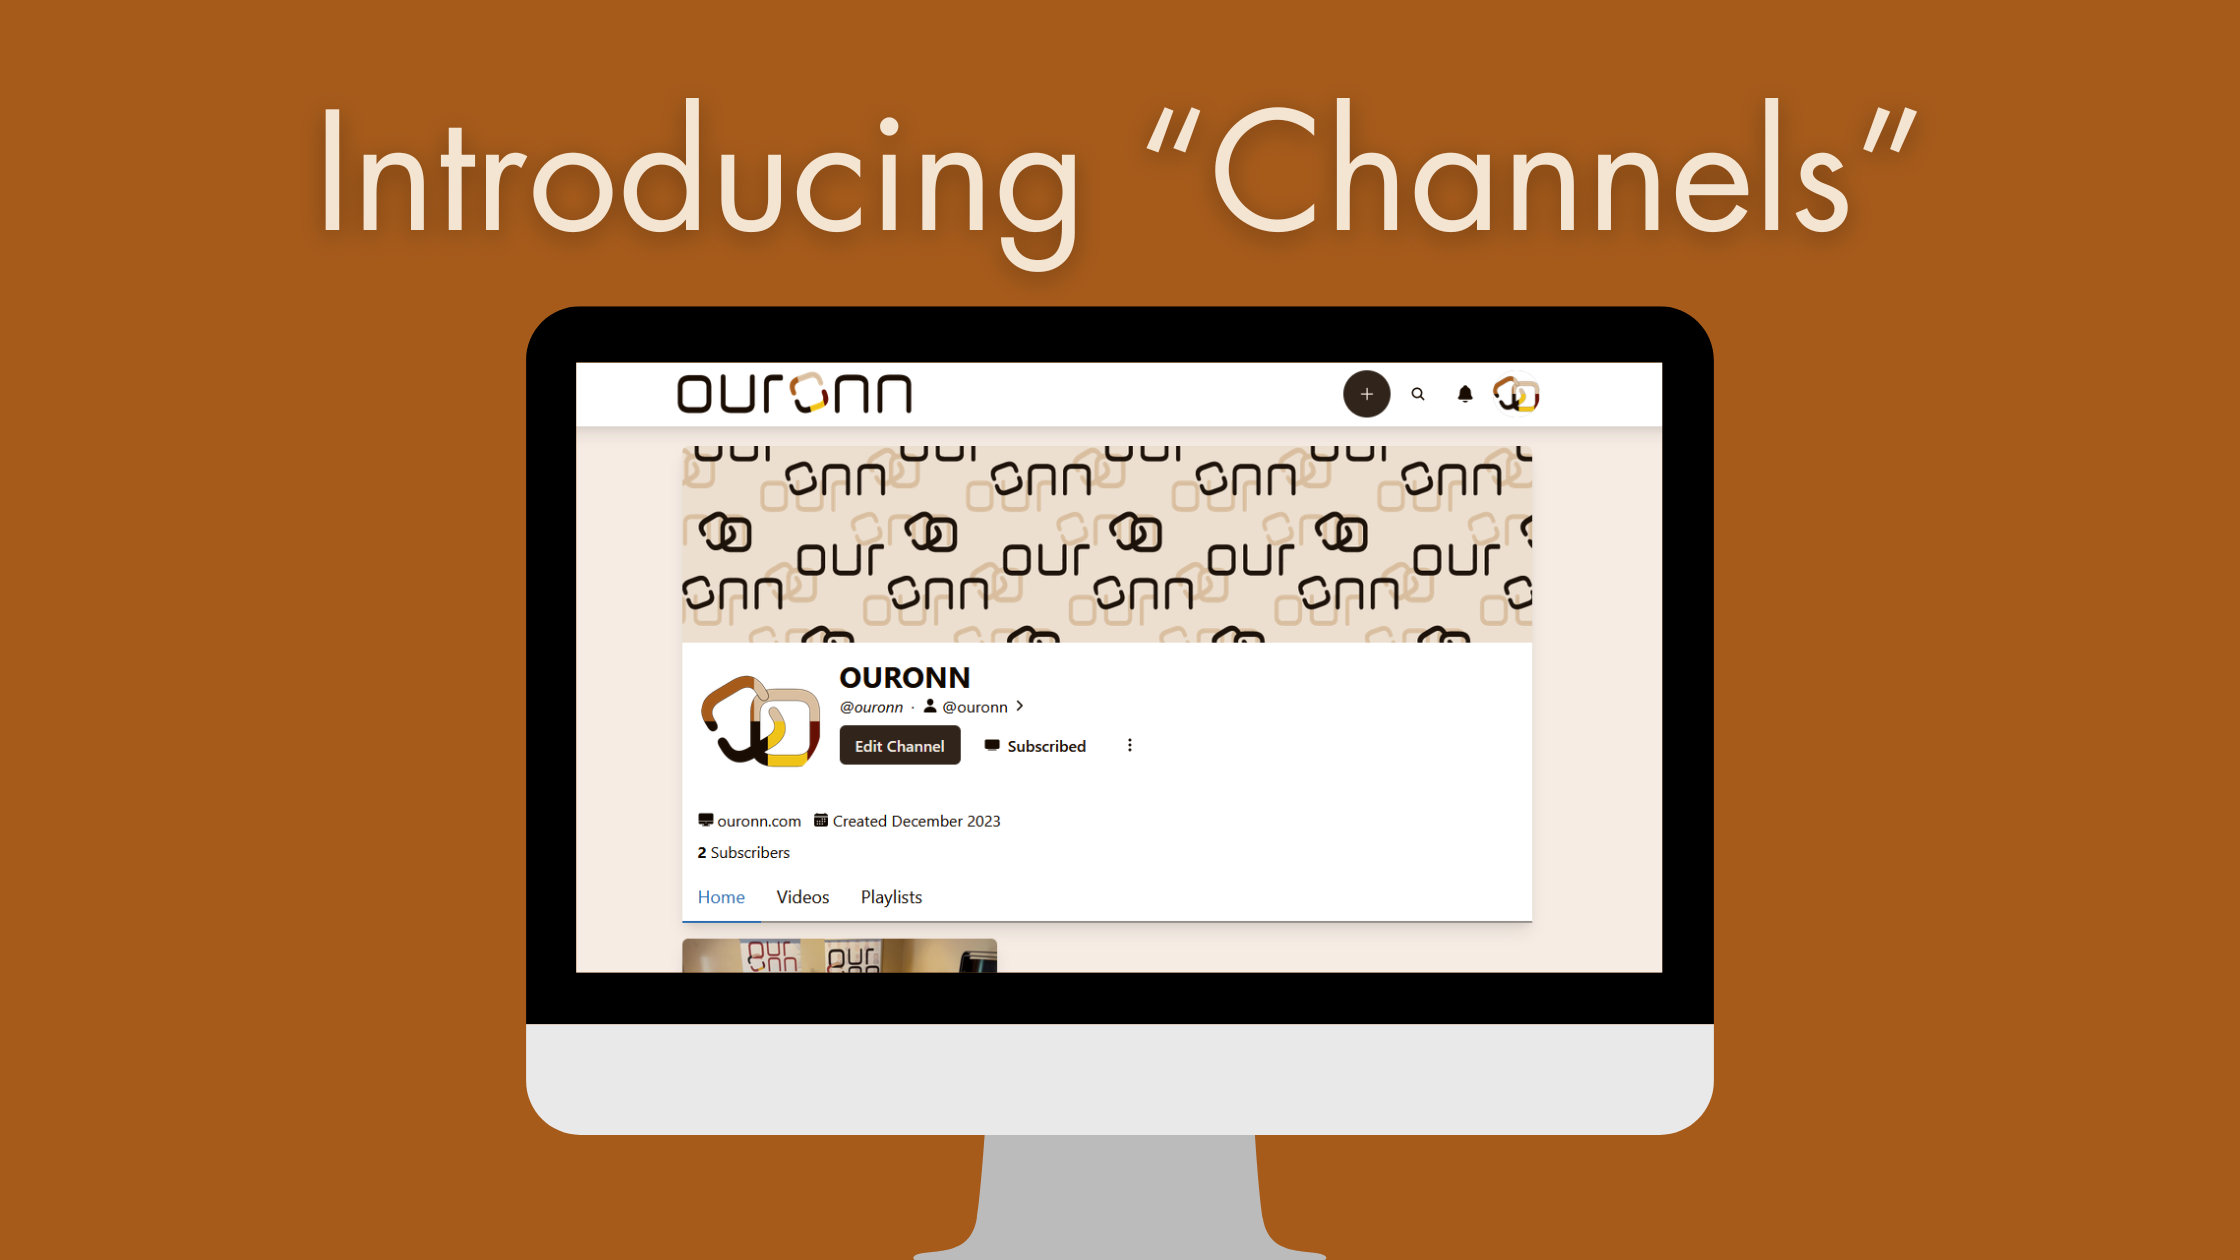 "Introducing OURONN “Channels”" Cover Image